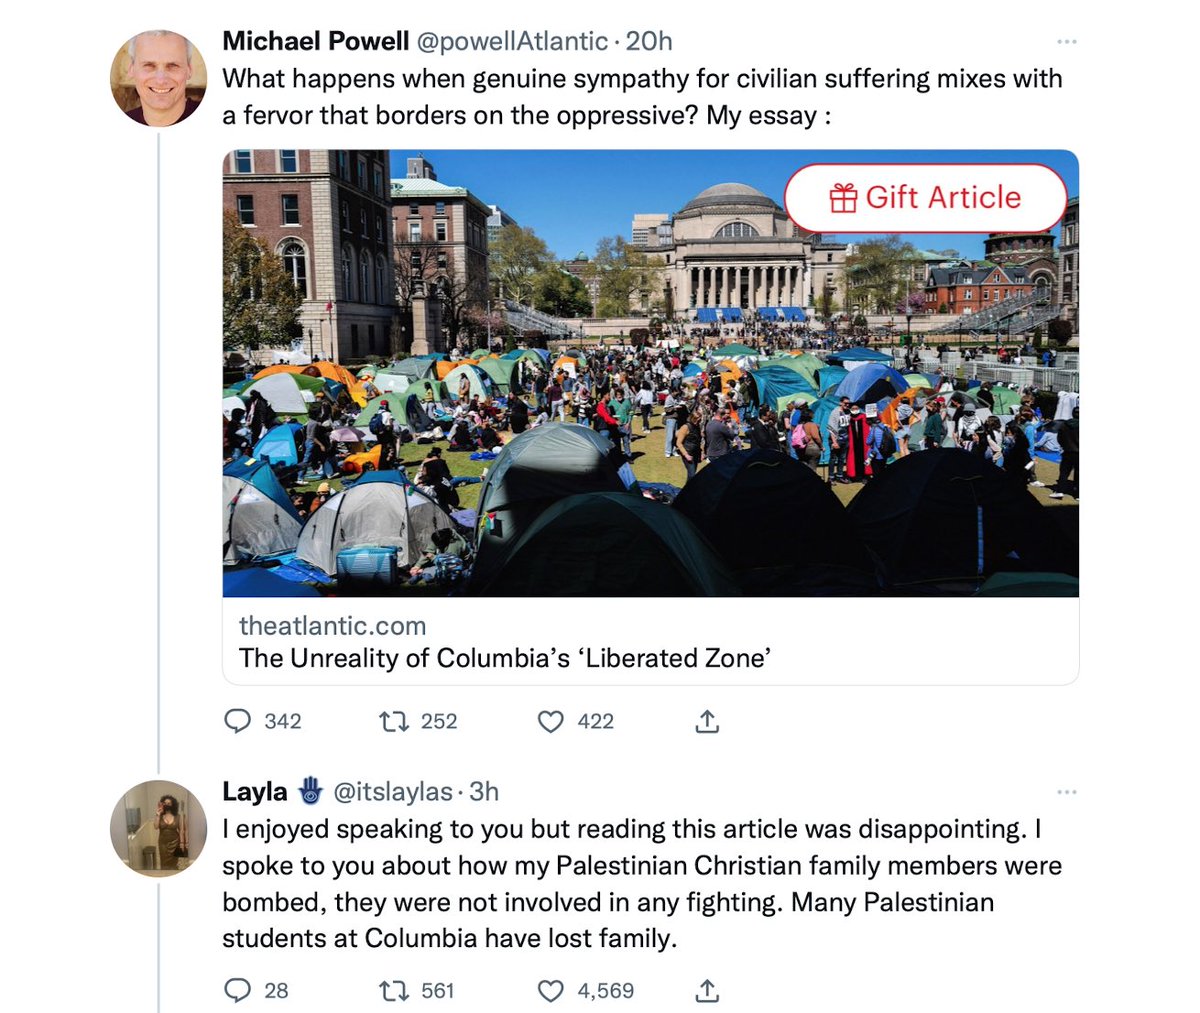 This exchange shows how poorly this piece was reported. One protester, a Palestinian American grad student, told Powell her family was bombed in Gaza. But instead of quoting her at all, Powell just writes blithely that she “lost family in the fighting in Gaza.”